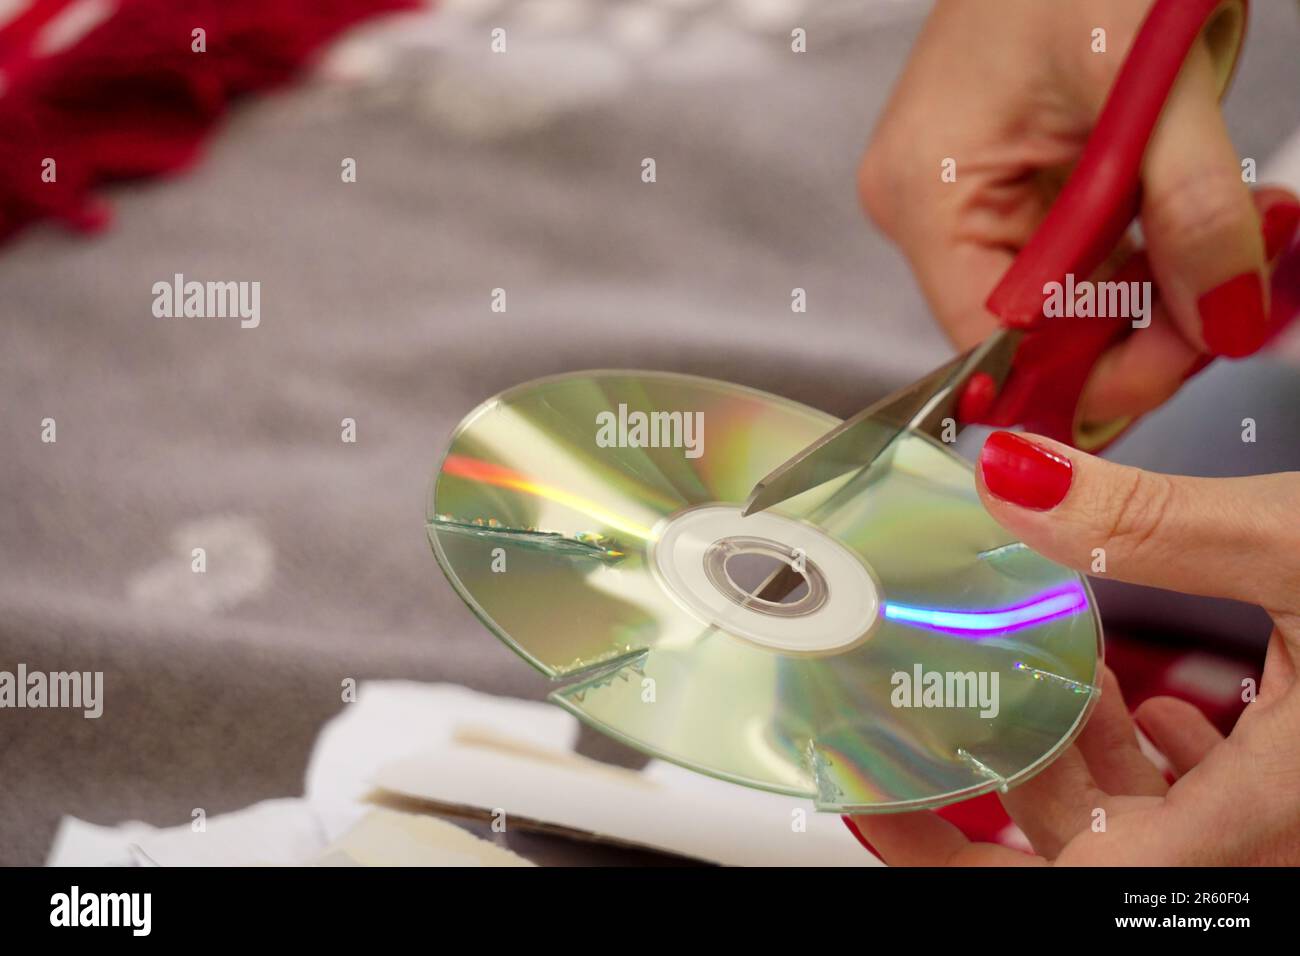 Woman cutting old compact discs with scissors at home close up view Stock Photo